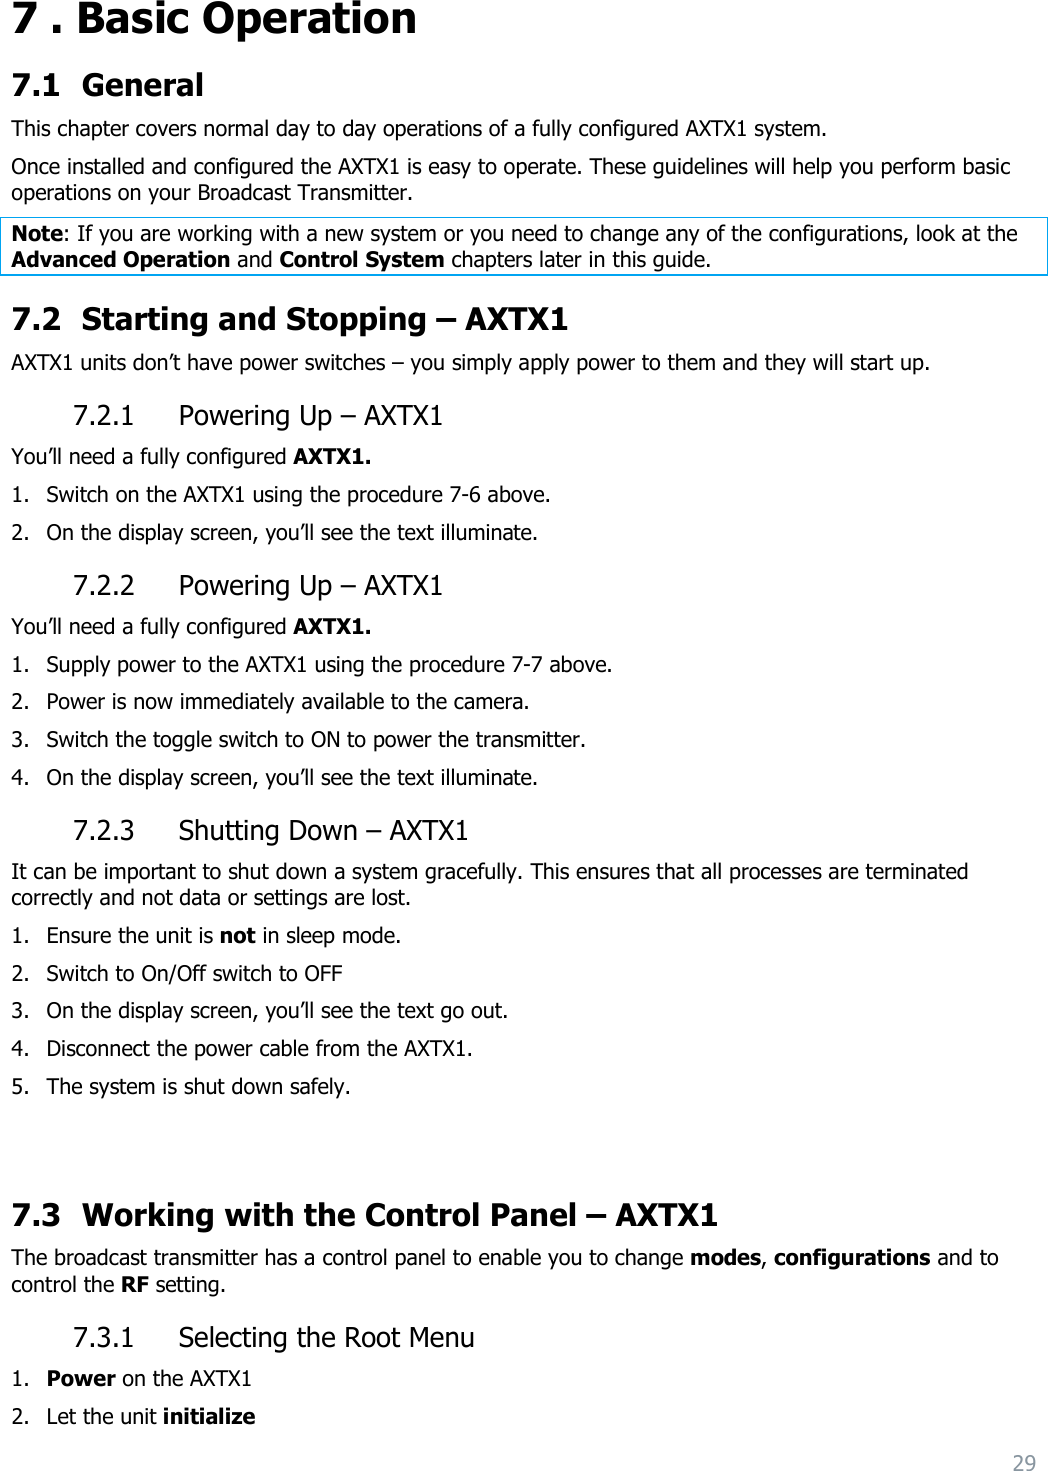 29  7 . Basic Operation 7.1 General This chapter covers normal day to day operations of a fully configured AXTX1 system. Once installed and configured the AXTX1 is easy to operate. These guidelines will help you perform basic operations on your Broadcast Transmitter. Note: If you are working with a new system or you need to change any of the configurations, look at the Advanced Operation and Control System chapters later in this guide. 7.2 Starting and Stopping – AXTX1  AXTX1 units don’t have power switches – you simply apply power to them and they will start up. 7.2.1 Powering Up – AXTX1  You’ll need a fully configured AXTX1.  1. Switch on the AXTX1 using the procedure 7-6 above. 2. On the display screen, you’ll see the text illuminate. 7.2.2 Powering Up – AXTX1  You’ll need a fully configured AXTX1.  1. Supply power to the AXTX1 using the procedure 7-7 above. 2. Power is now immediately available to the camera. 3. Switch the toggle switch to ON to power the transmitter. 4. On the display screen, you’ll see the text illuminate. 7.2.3 Shutting Down – AXTX1  It can be important to shut down a system gracefully. This ensures that all processes are terminated correctly and not data or settings are lost. 1. Ensure the unit is not in sleep mode. 2. Switch to On/Off switch to OFF 3. On the display screen, you’ll see the text go out. 4. Disconnect the power cable from the AXTX1. 5. The system is shut down safely.   7.3 Working with the Control Panel – AXTX1  The broadcast transmitter has a control panel to enable you to change modes, configurations and to control the RF setting. 7.3.1 Selecting the Root Menu 1. Power on the AXTX1  2. Let the unit initialize 